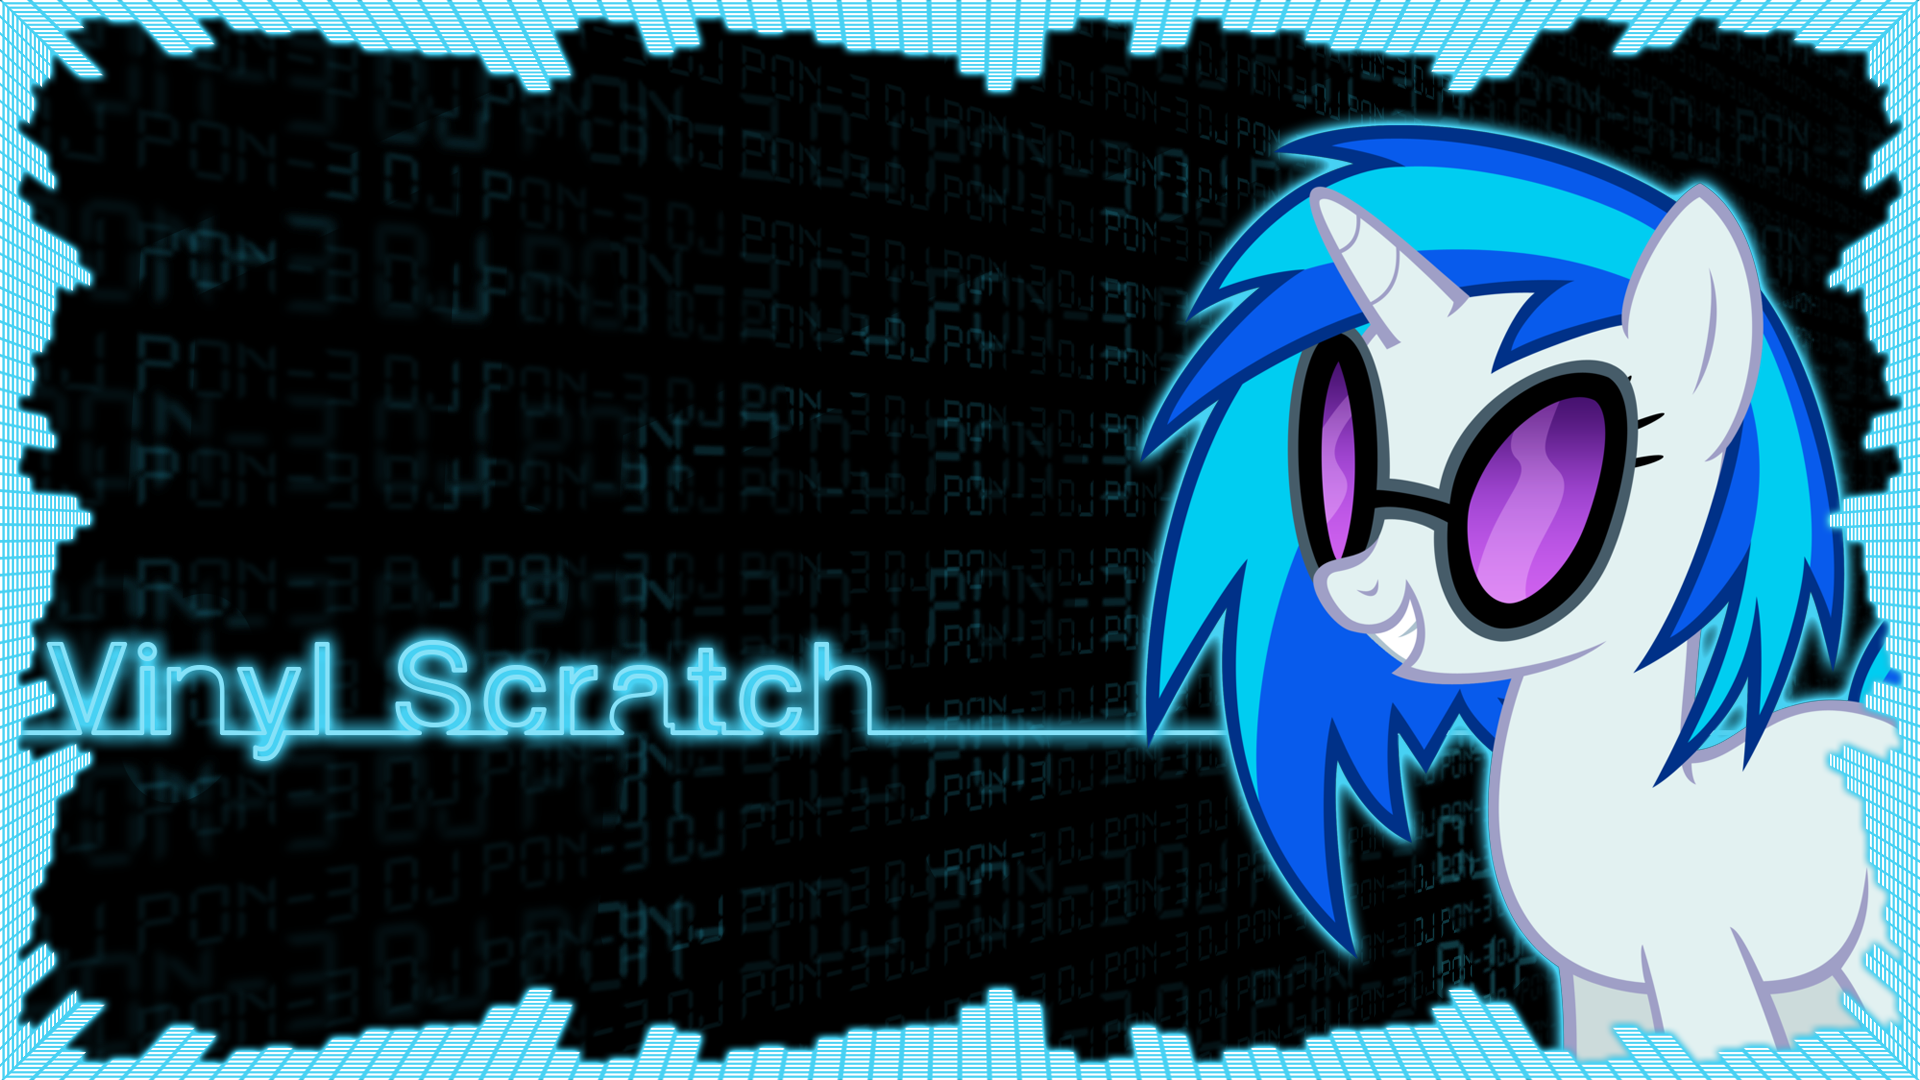 Vinyl Scratch by pims1978